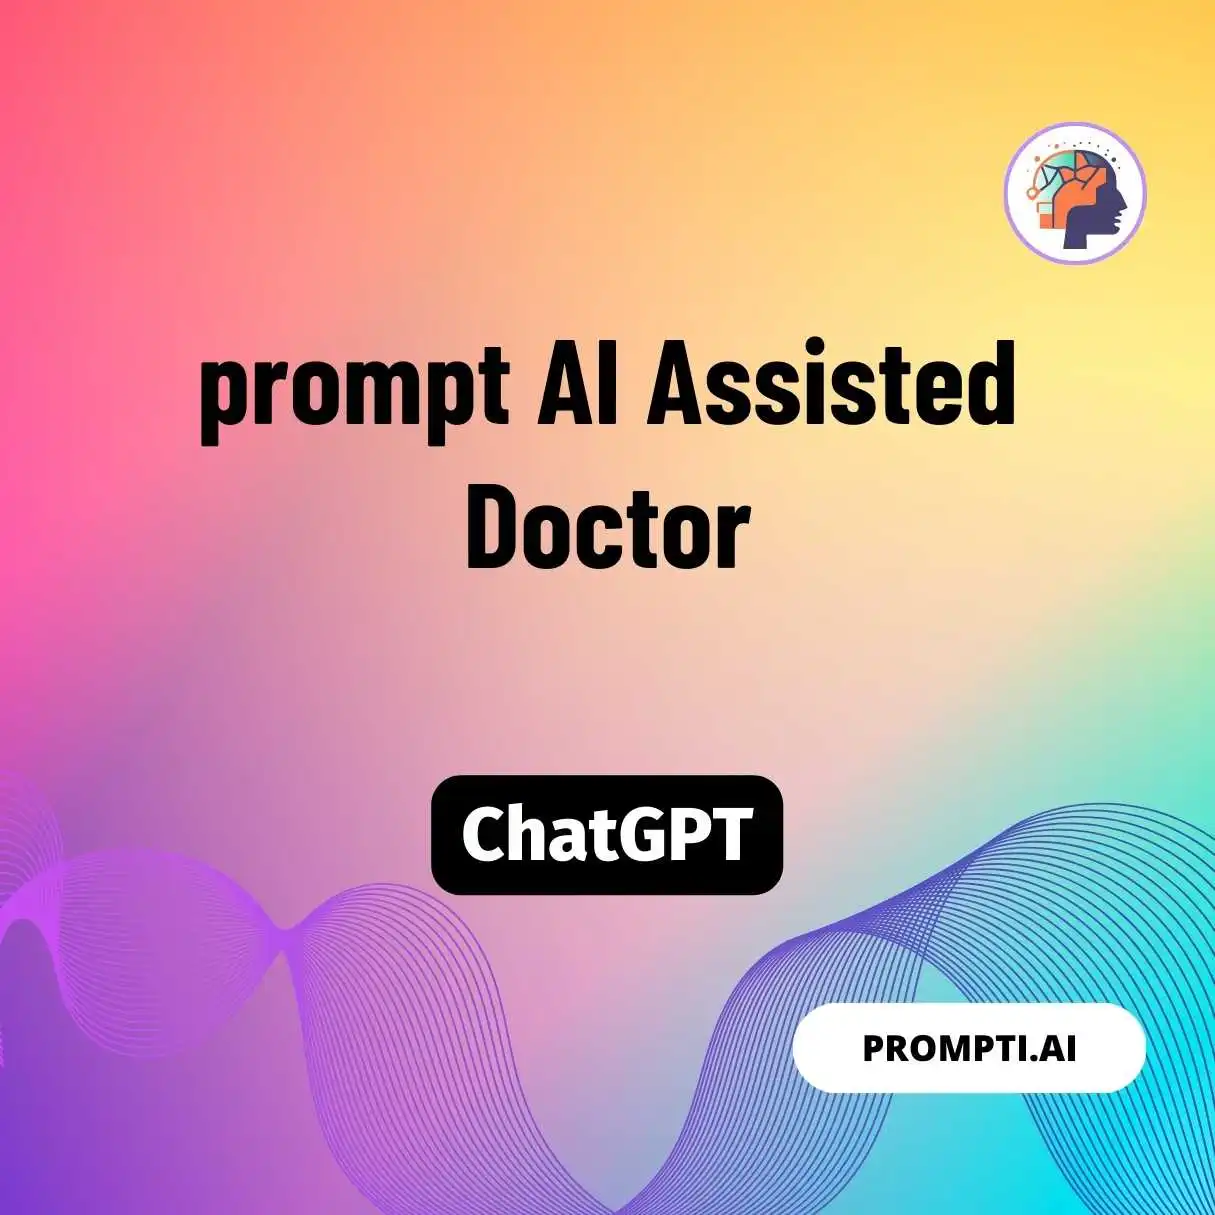 prompt AI Assisted Doctor